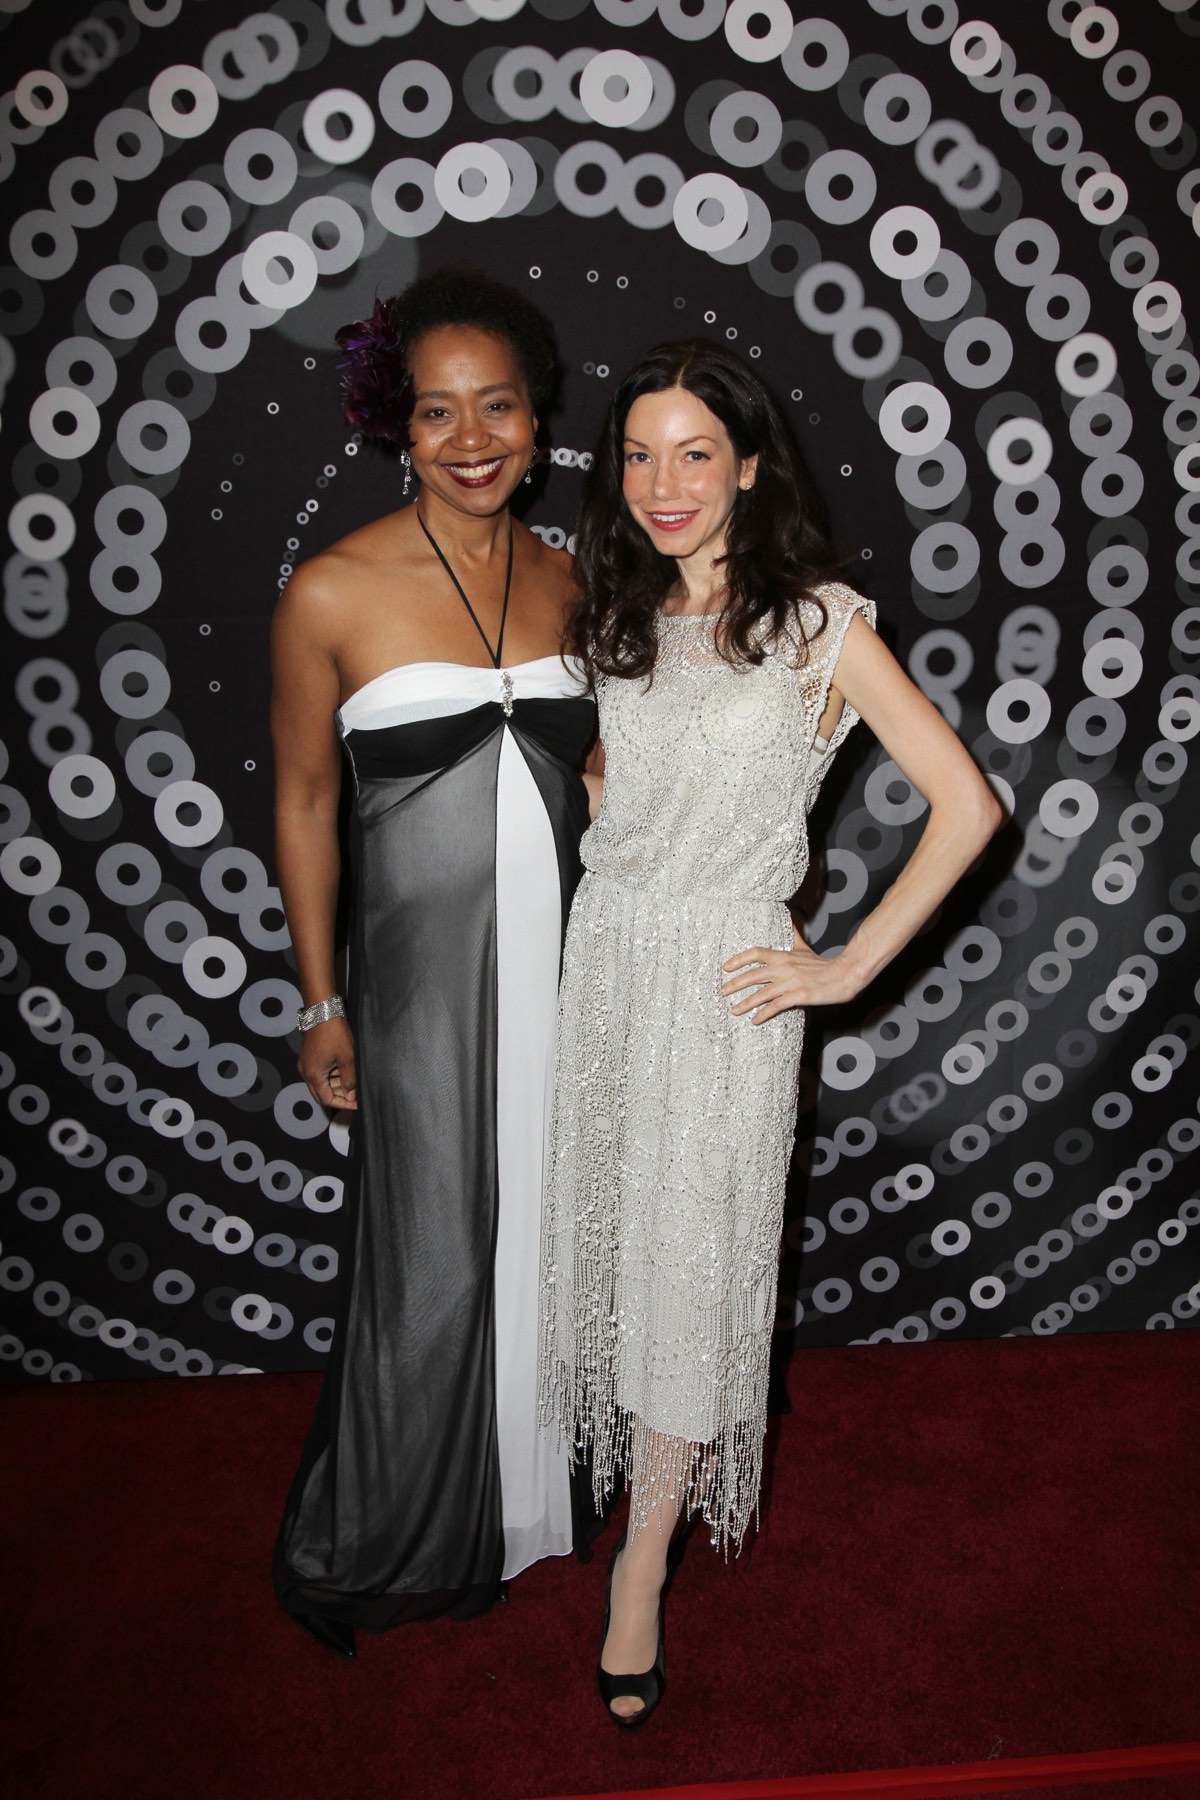 With Karole Foreman at the 2011 Ovation Awards